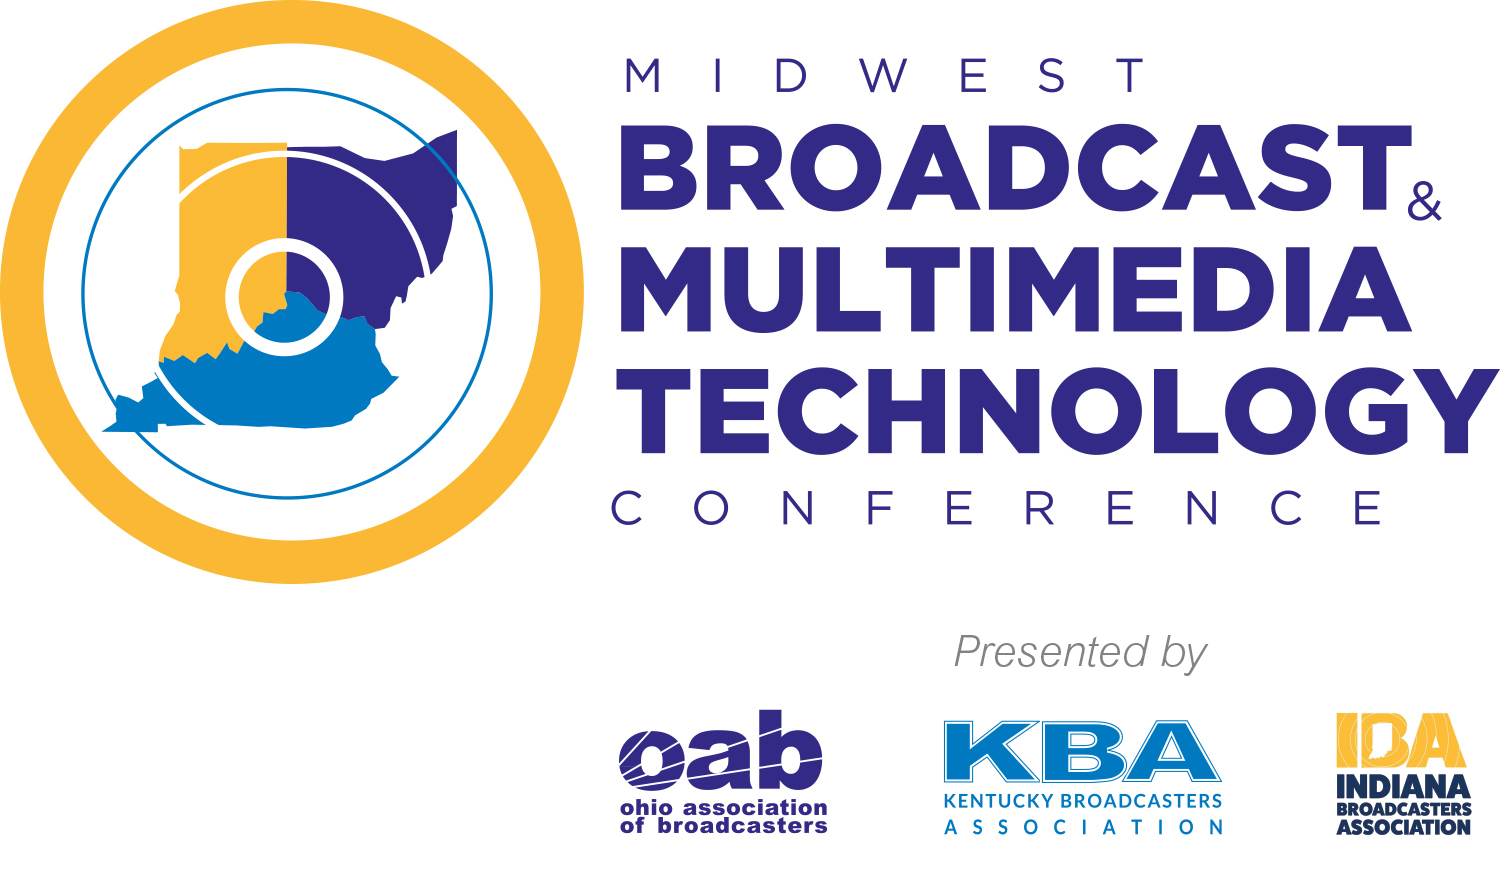 Midwest Broadcast & Multimedia Technology Conference, Franklin, Ohio, United States